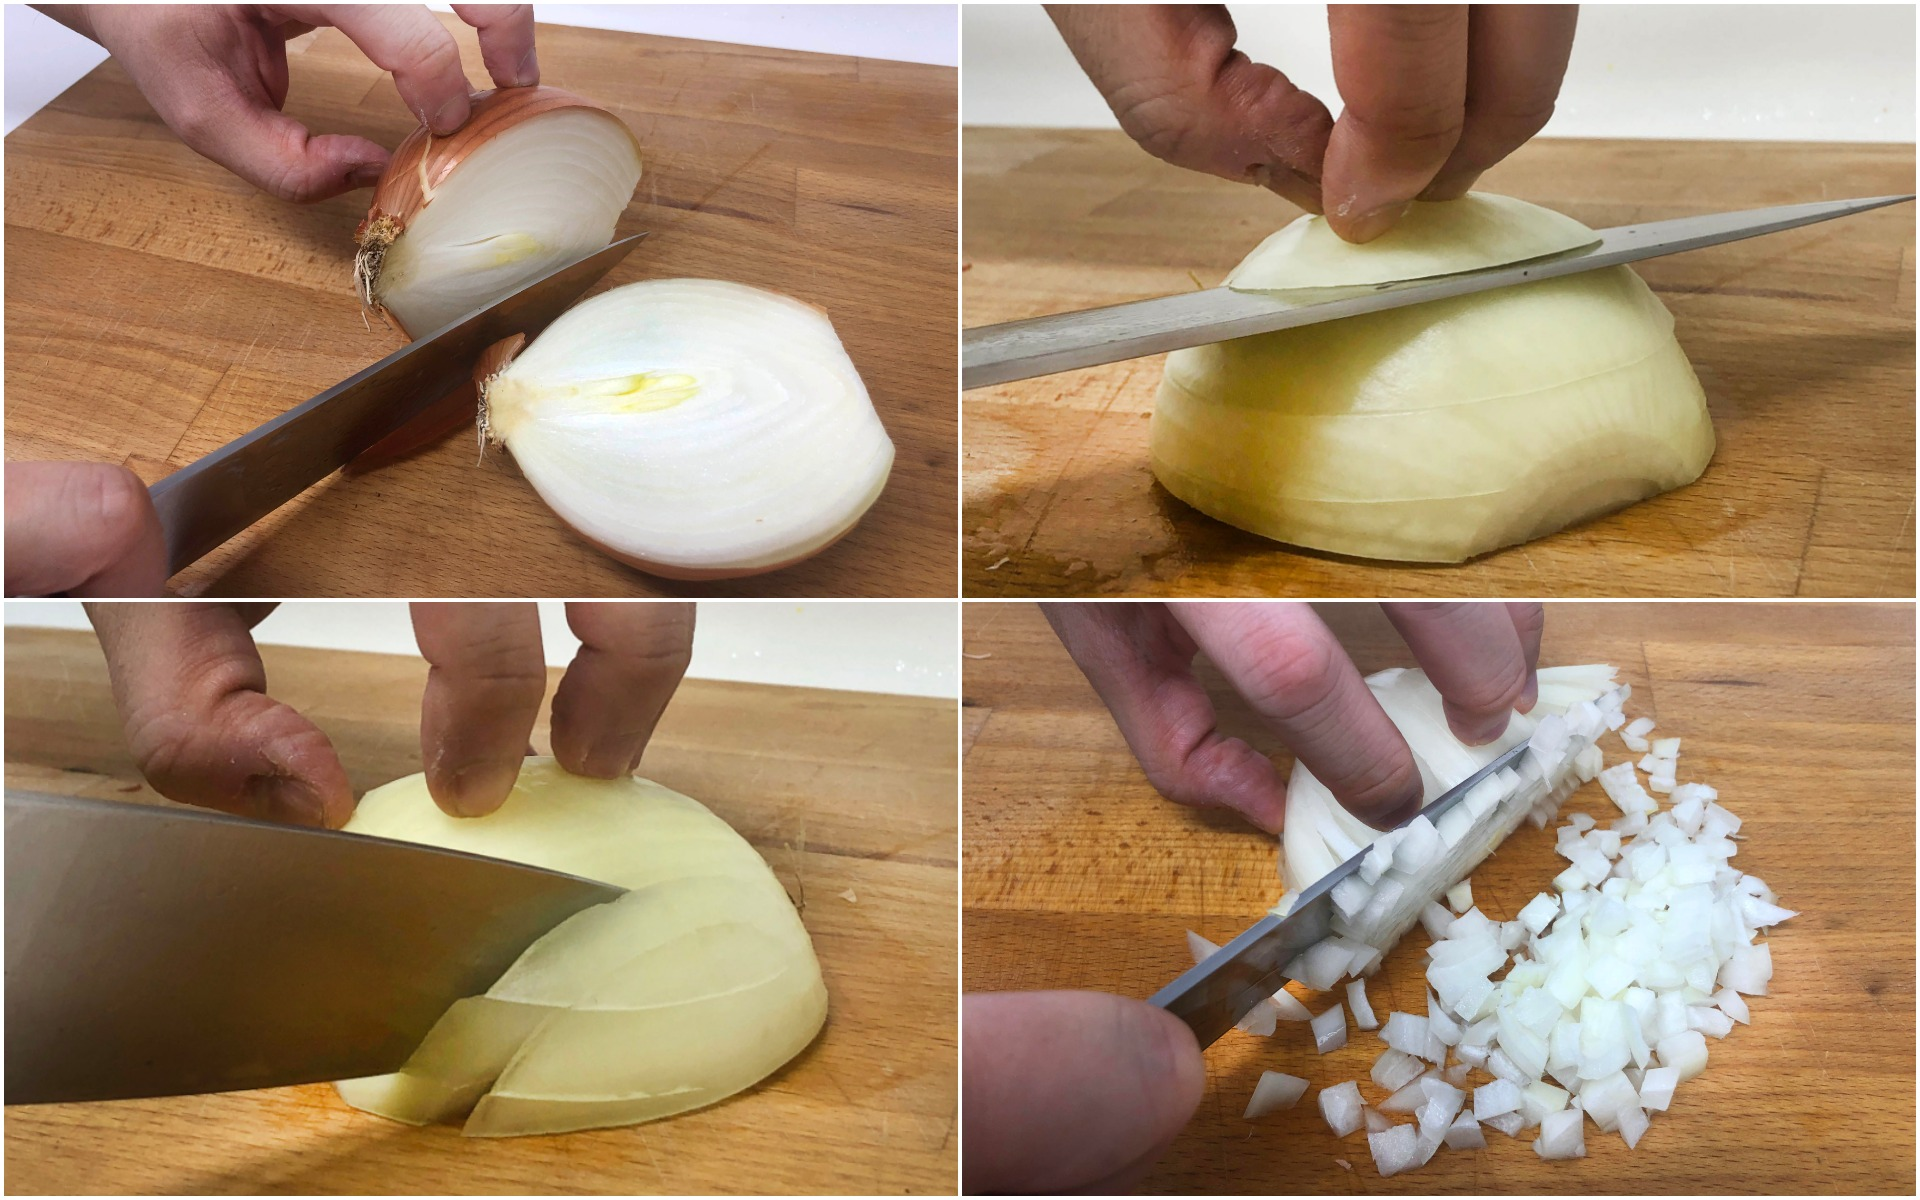 How to chop an onion, step by step